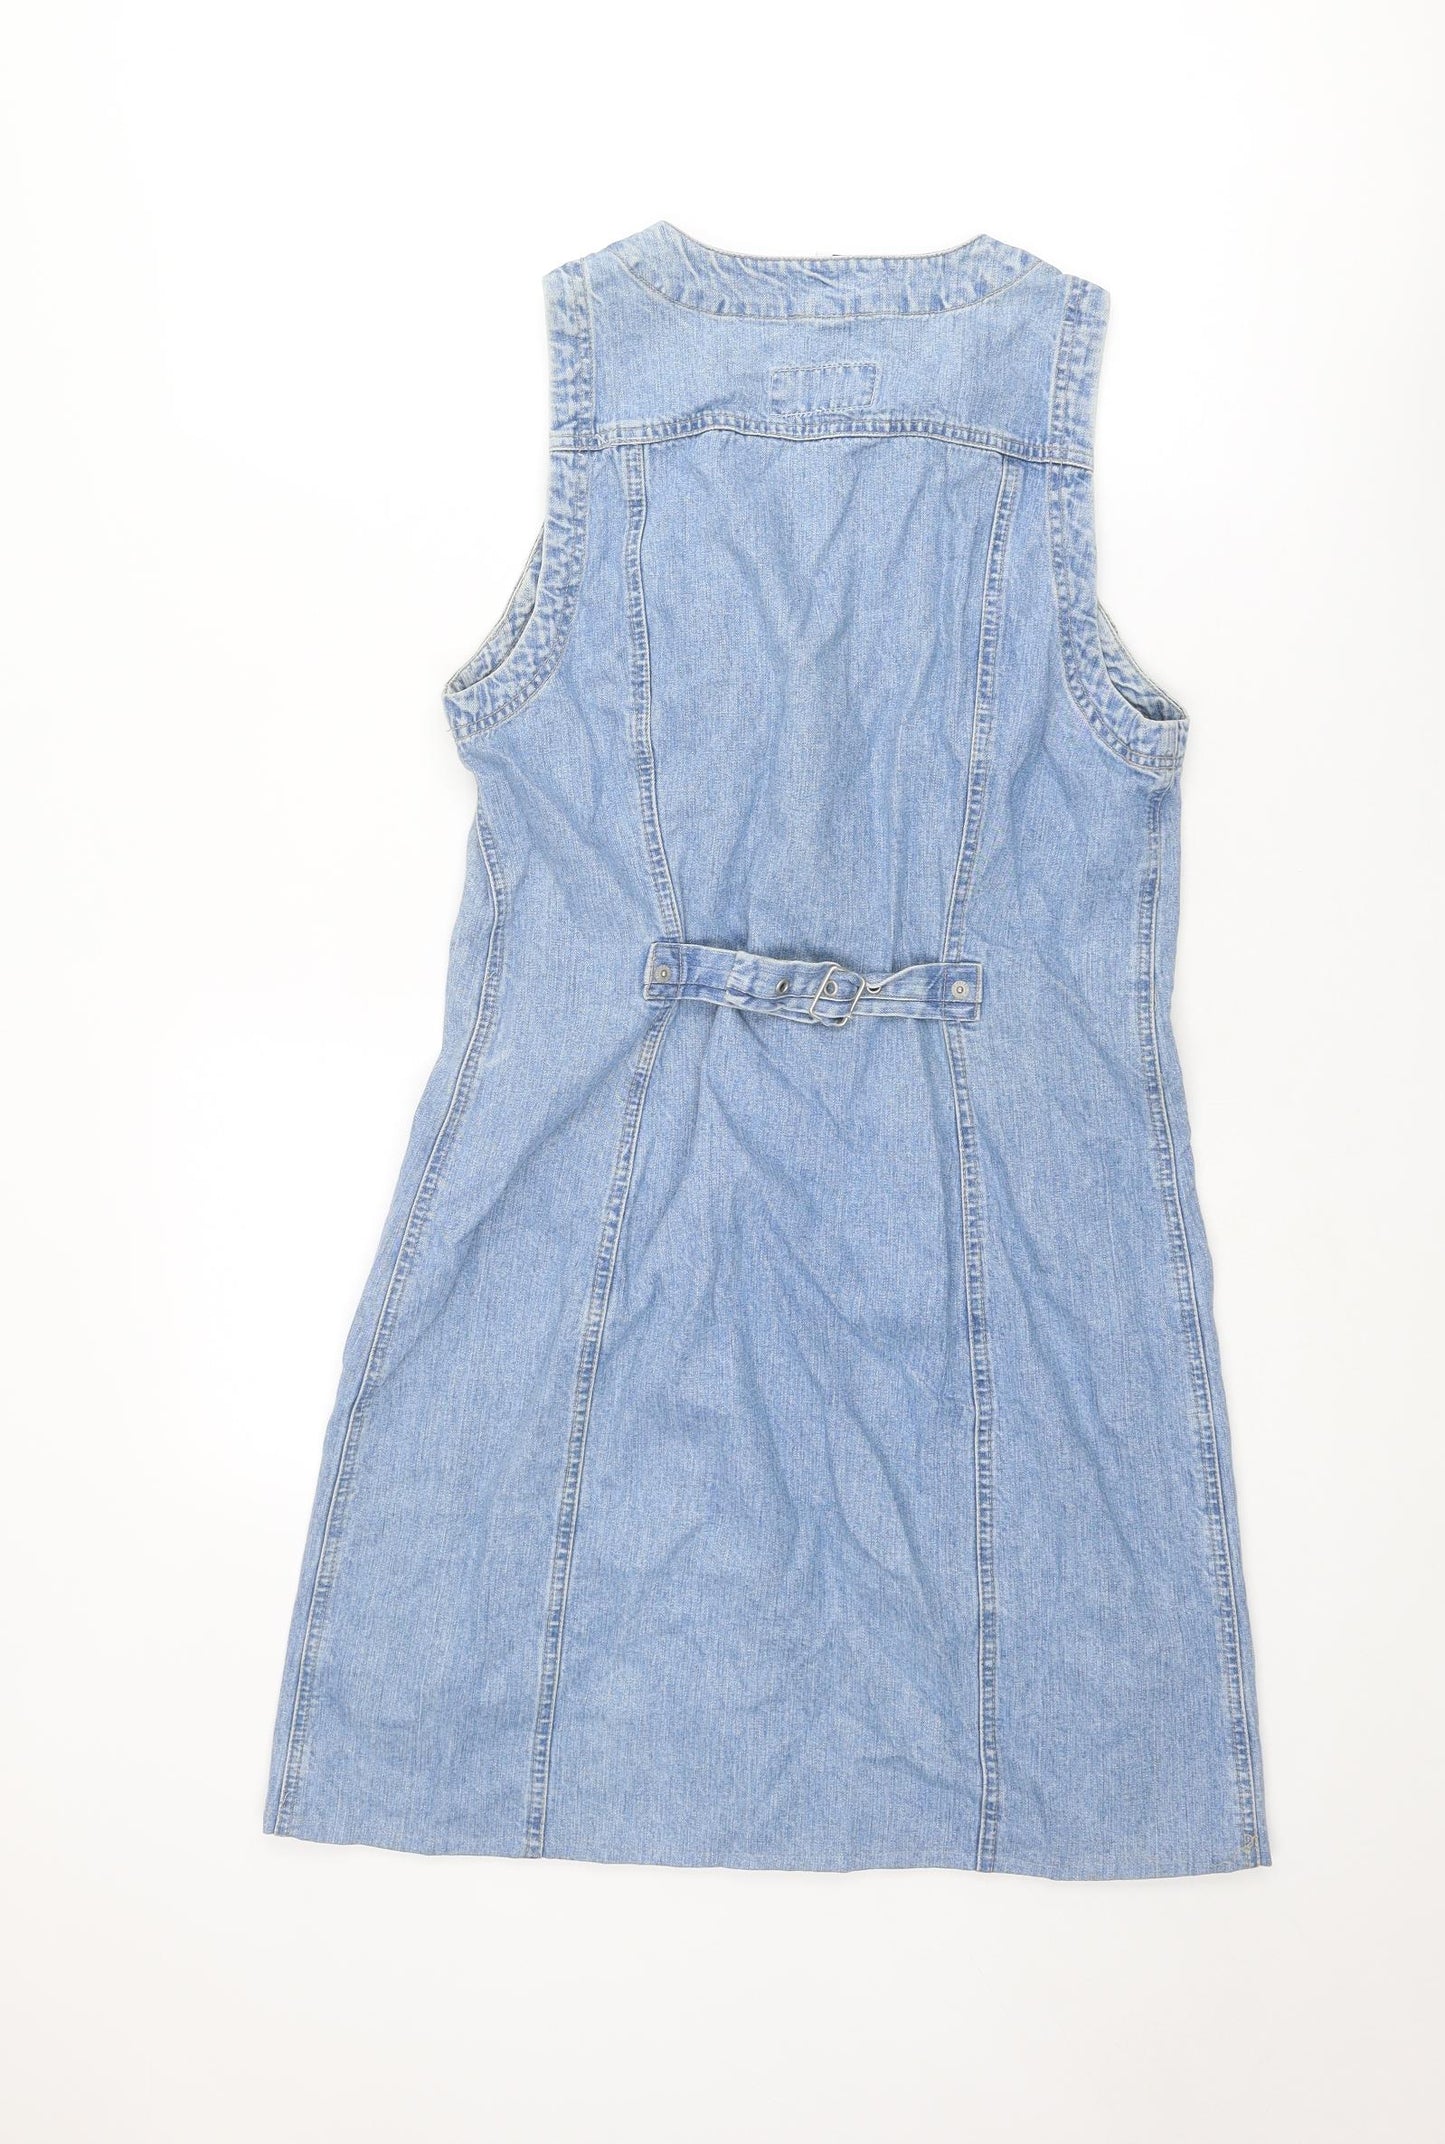 Blue Rinse Womens Blue Cotton Pinafore/Dungaree Dress Size 12 V-Neck Button